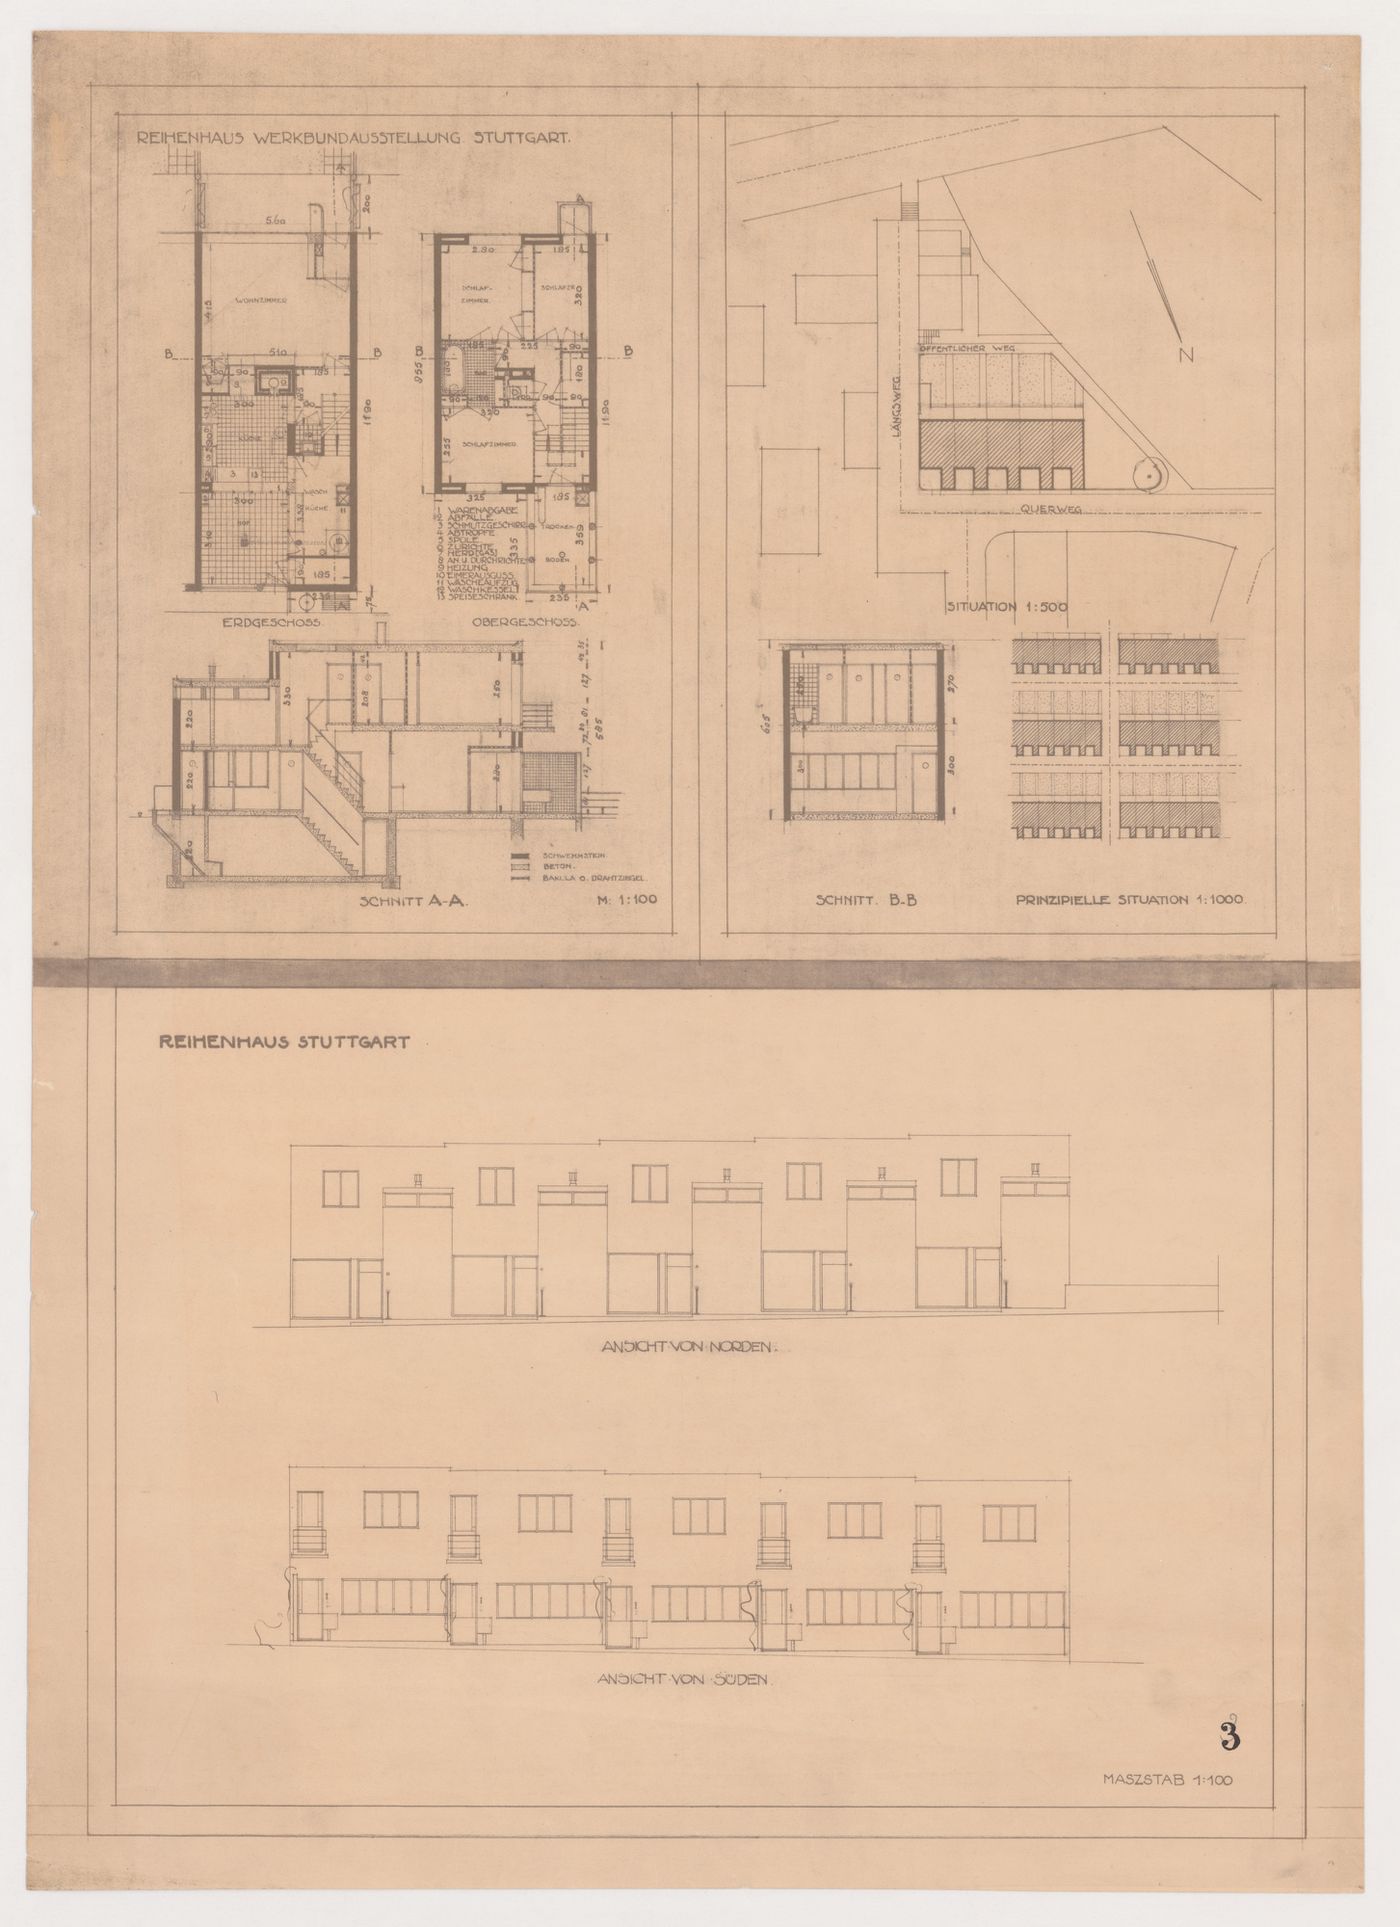 Site plans, plans, sections, and elevations for terraced housing, Weissenhofsiedlung, Stuttgart, Germany